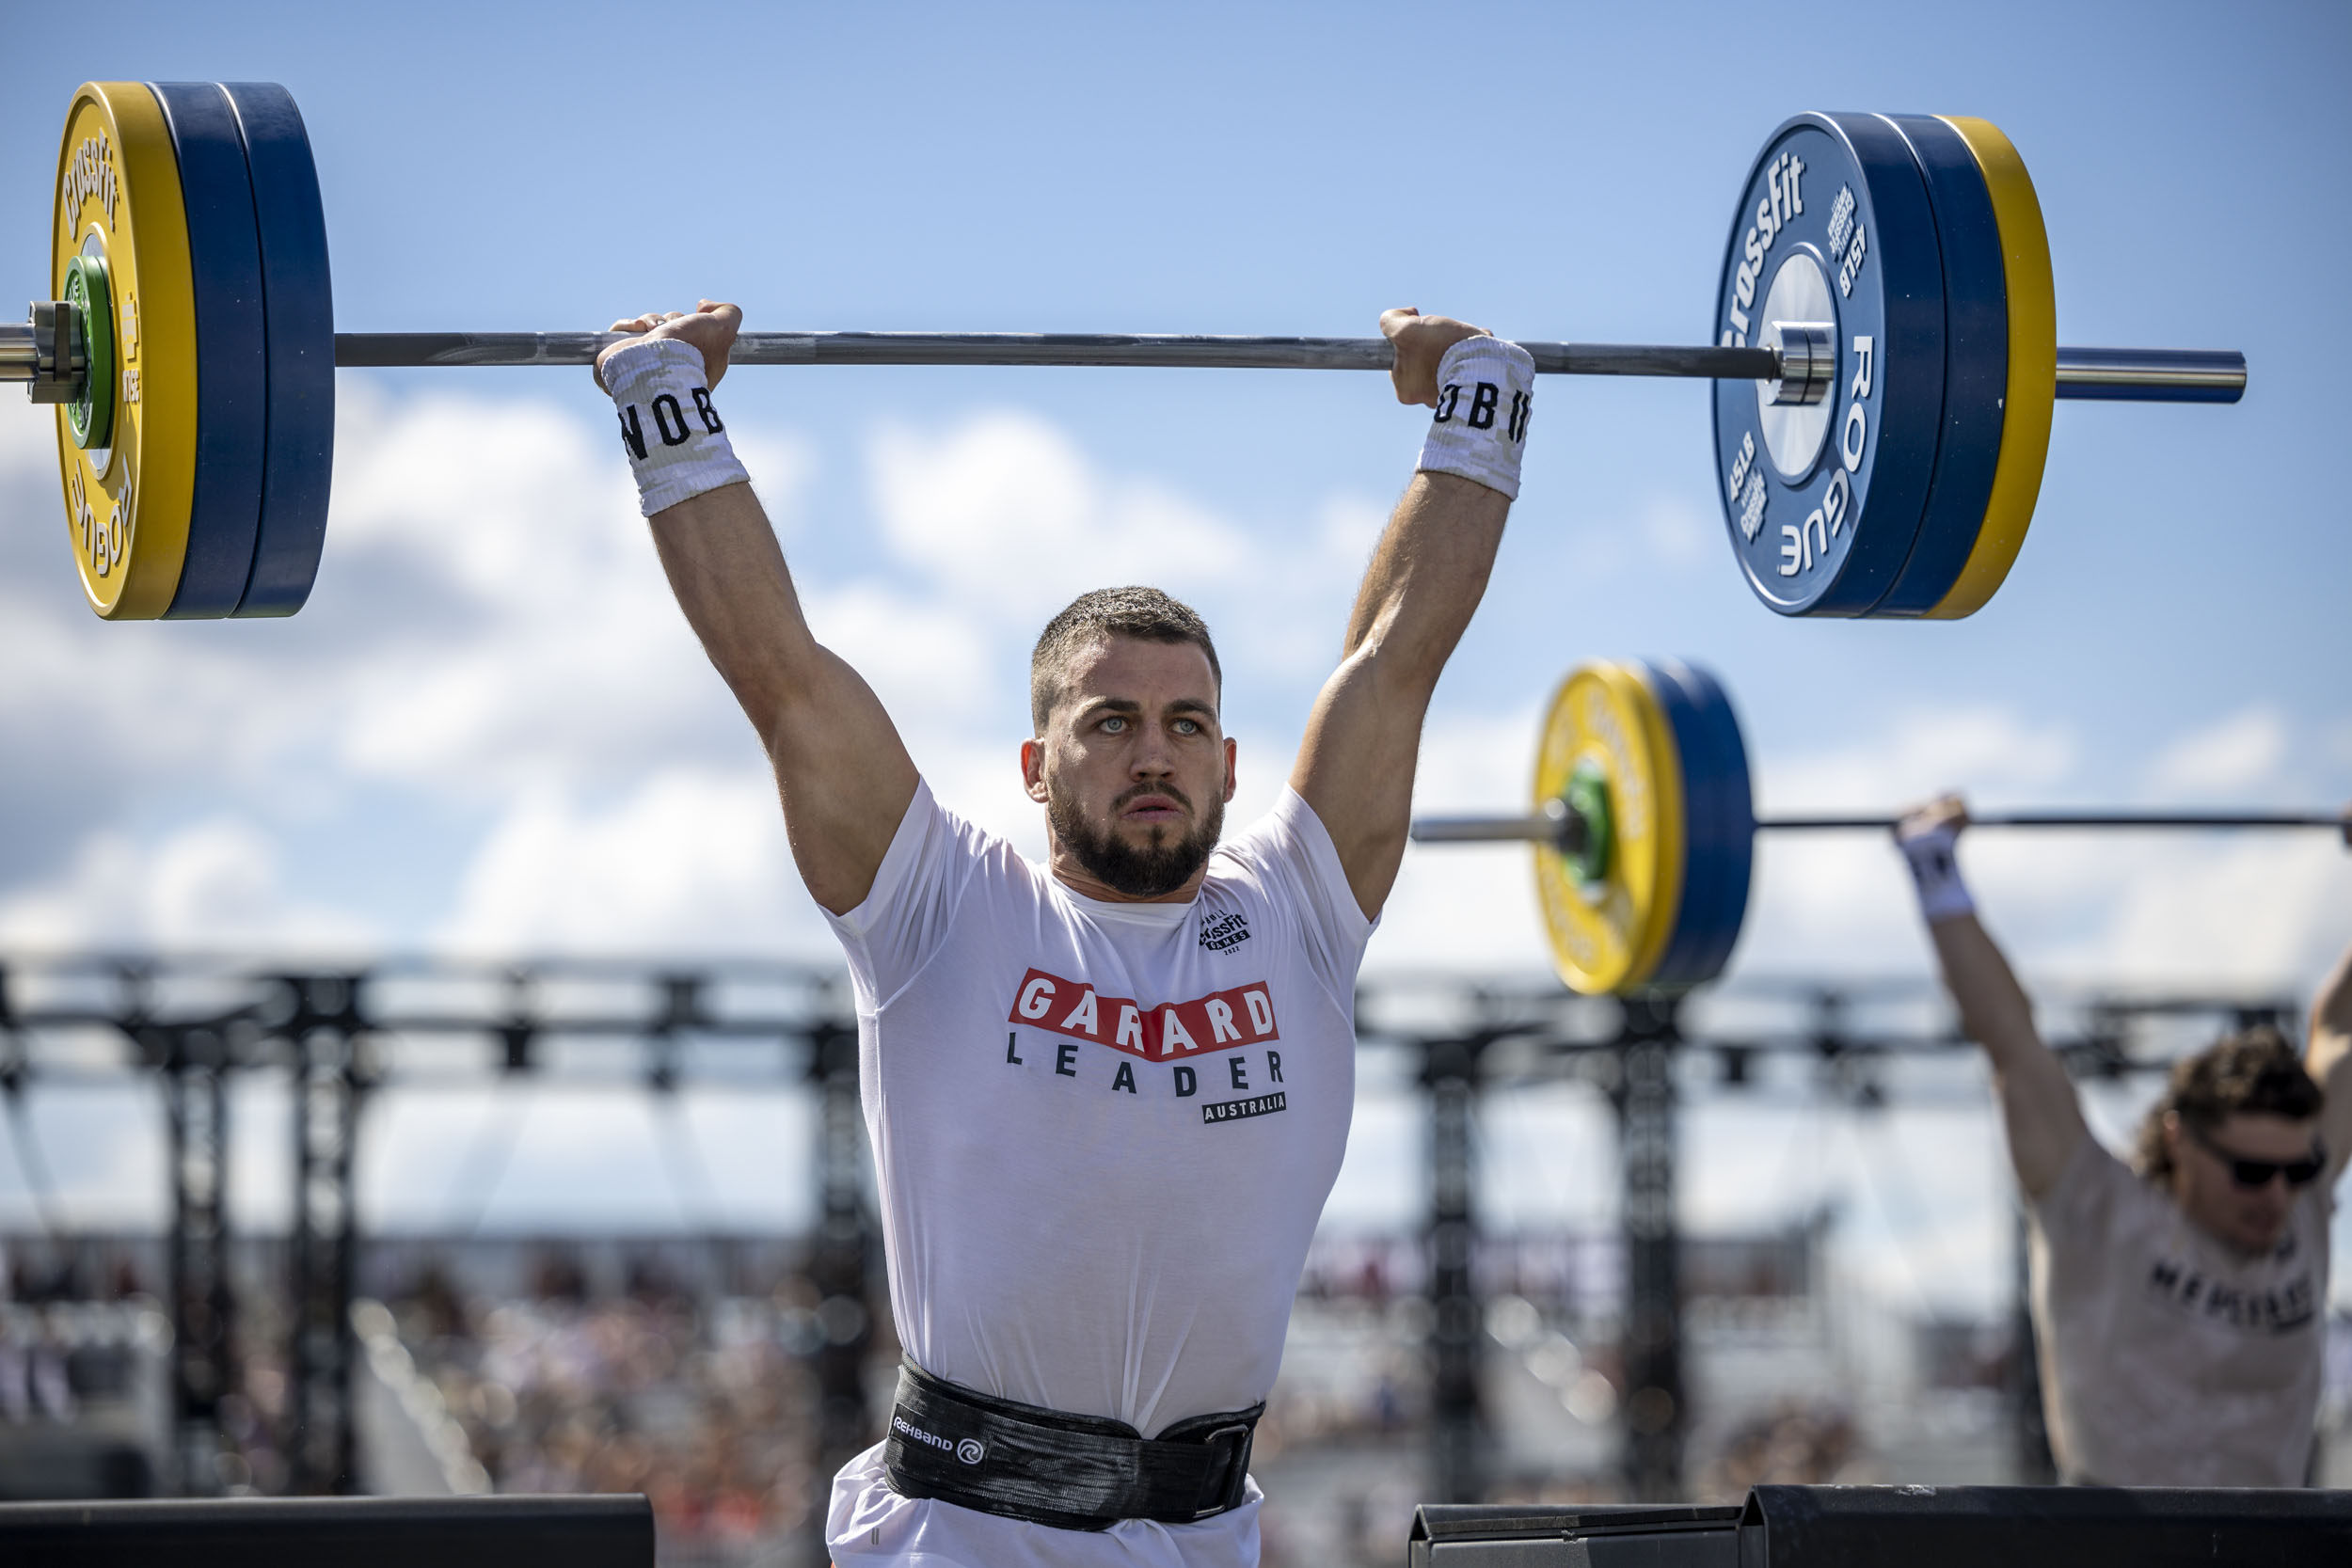 Ricky Garard leads the men after two days of competition. Photo: CrossFit Games